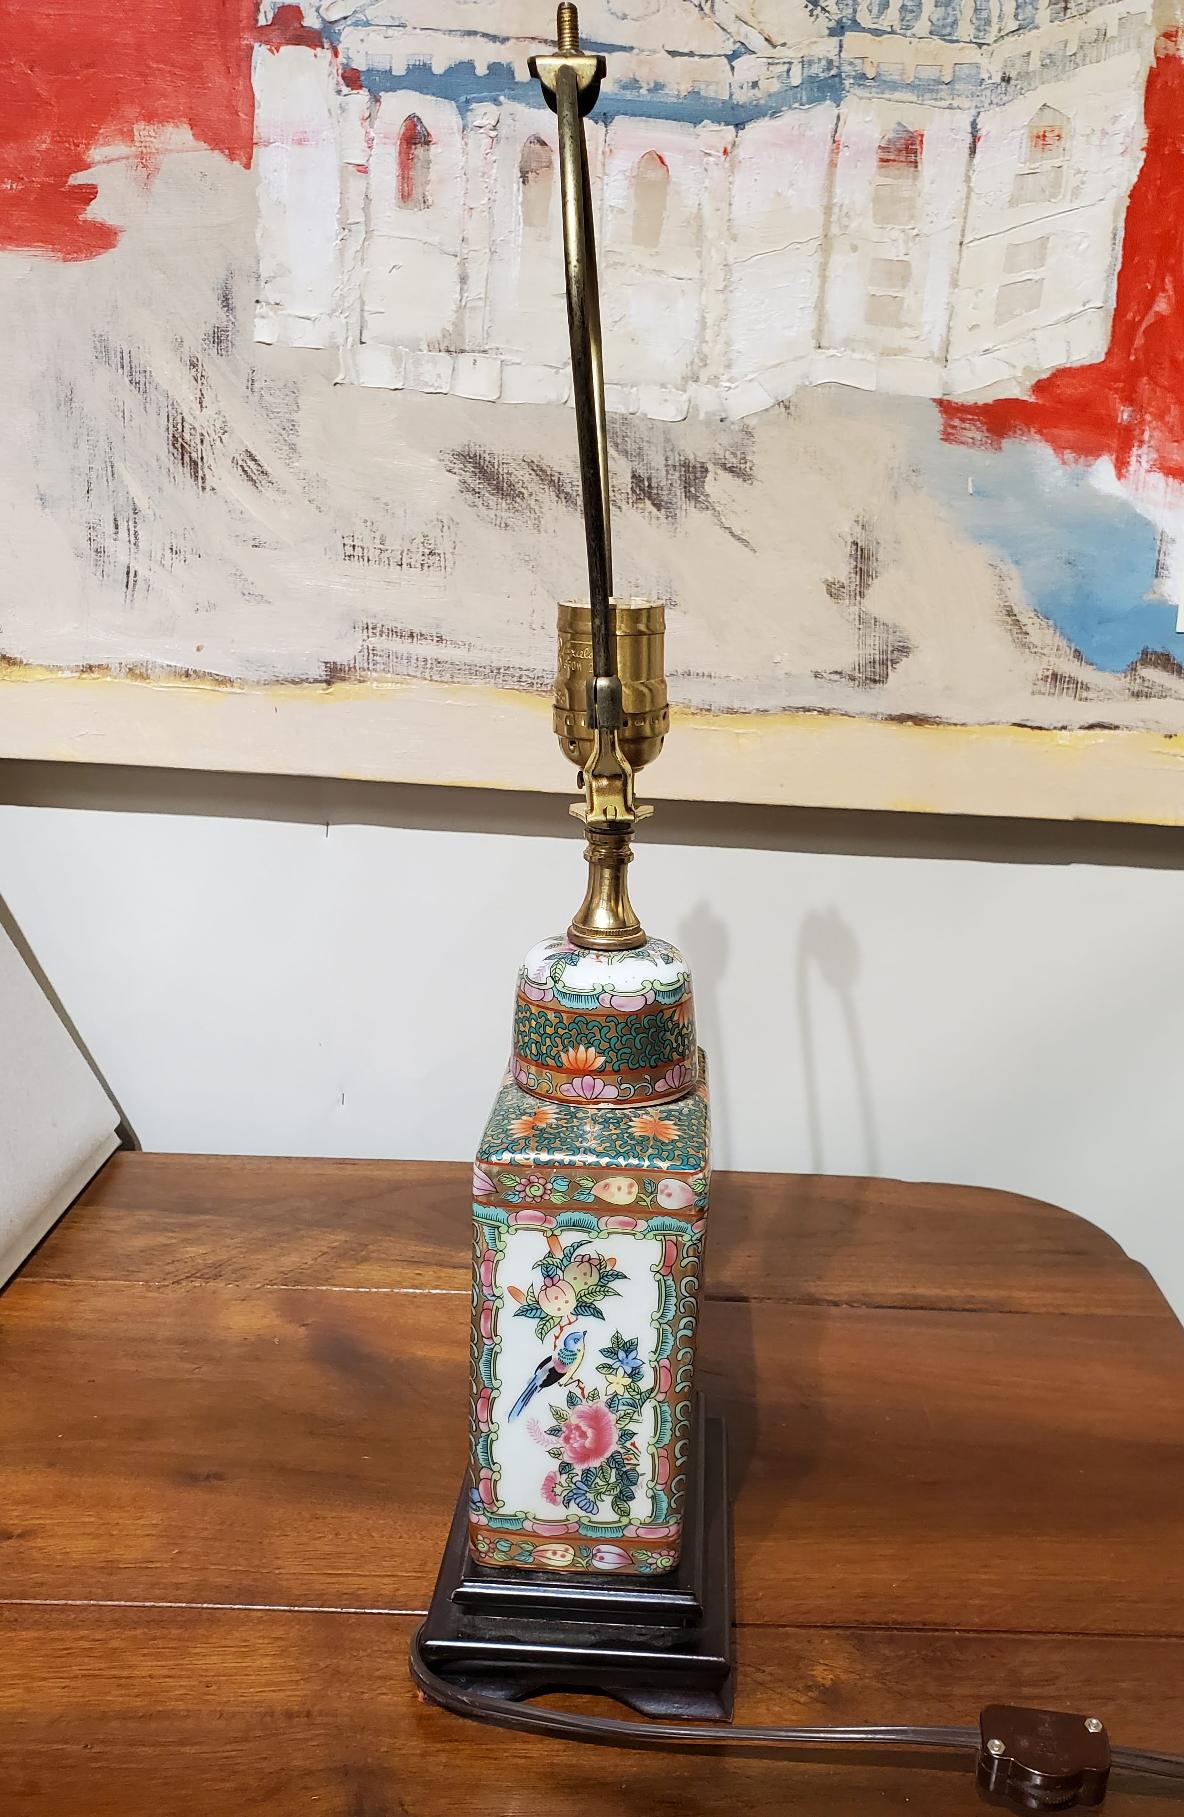 Small 19th century Chinese export urn converted to a lamp.
Measures: 19” H 5.5” W 4” D.
 